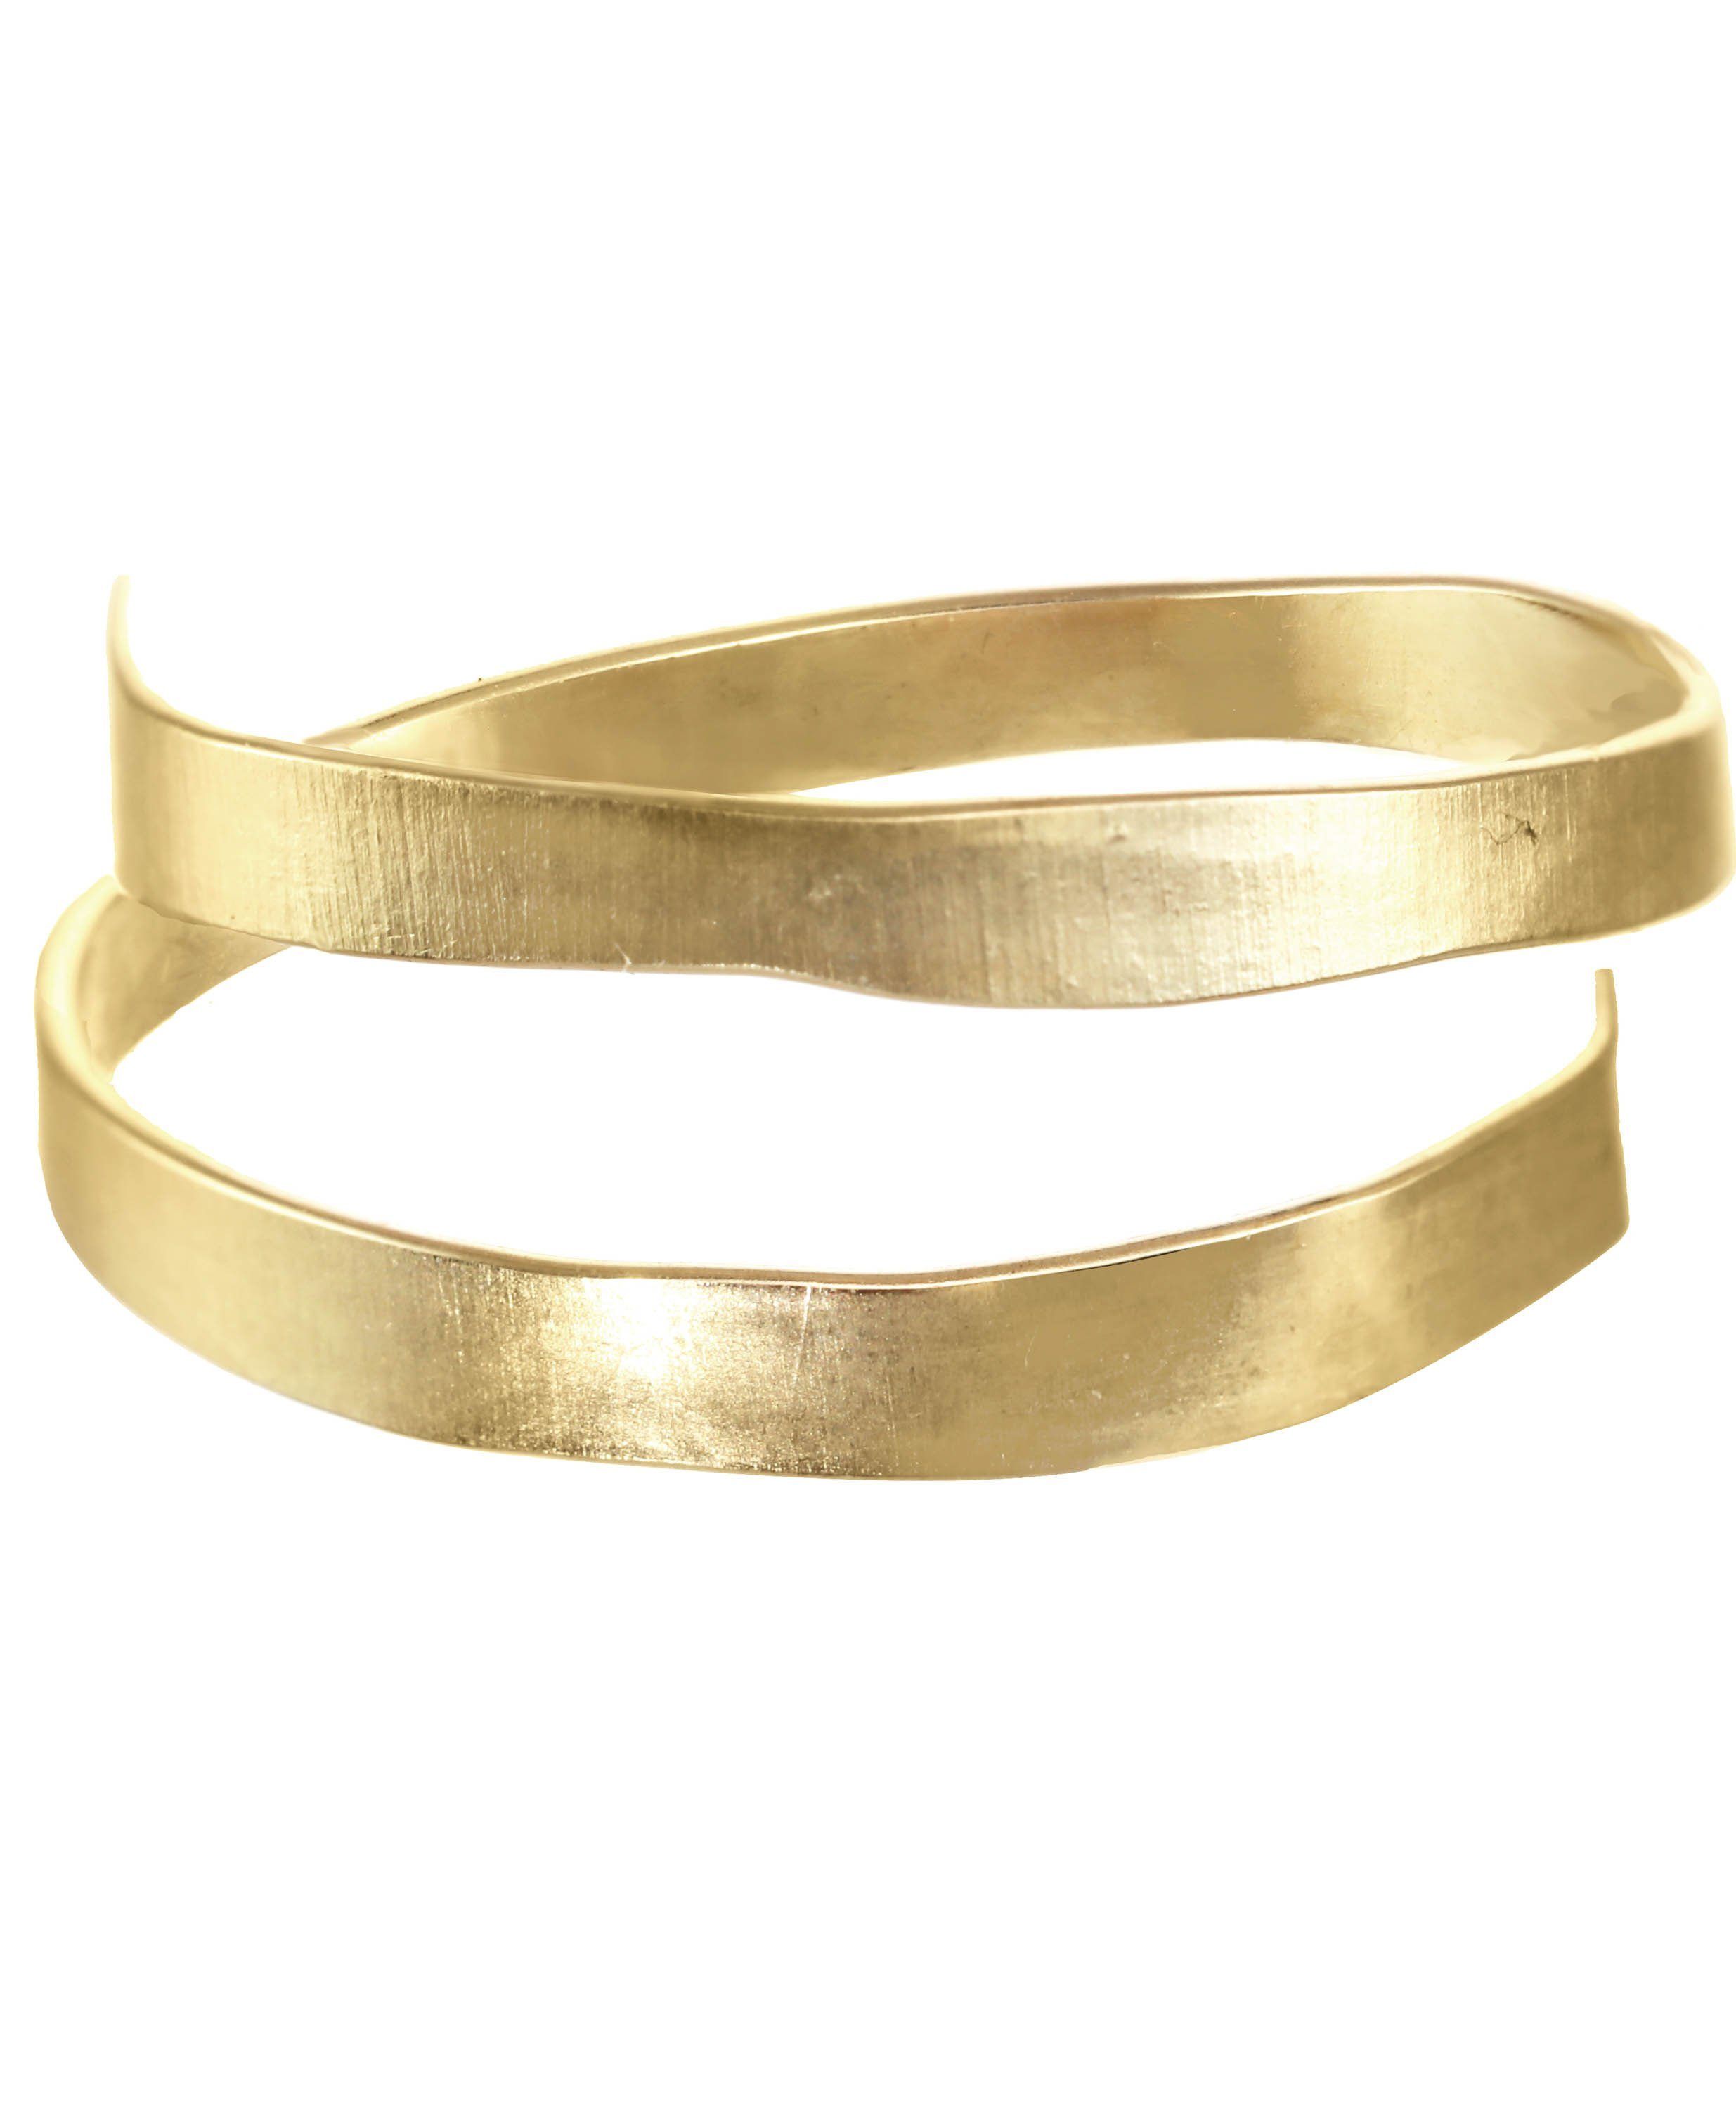 Evelyn Ring by KOZAKH. A spiral style ring, crafted in 14K Gold Filled.